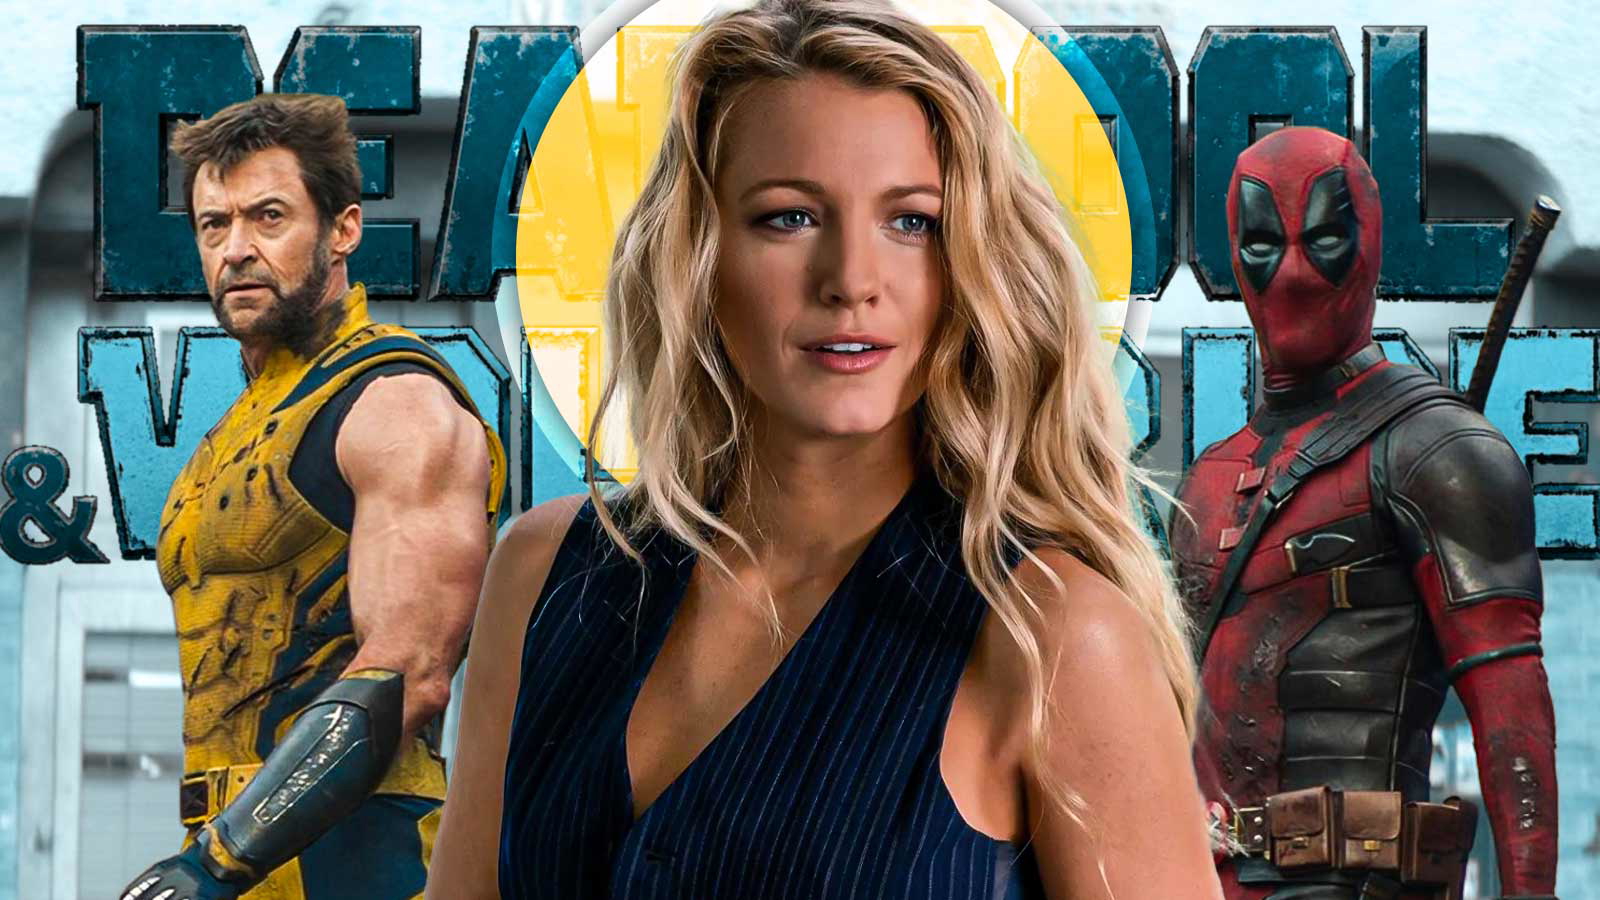 “Kinda obvious from the start”: Deadpool & Wolverine Teaser Convinces Fans Blake Lively is Playing Lady Deadpool That Seems the Safest Bet for the Movie